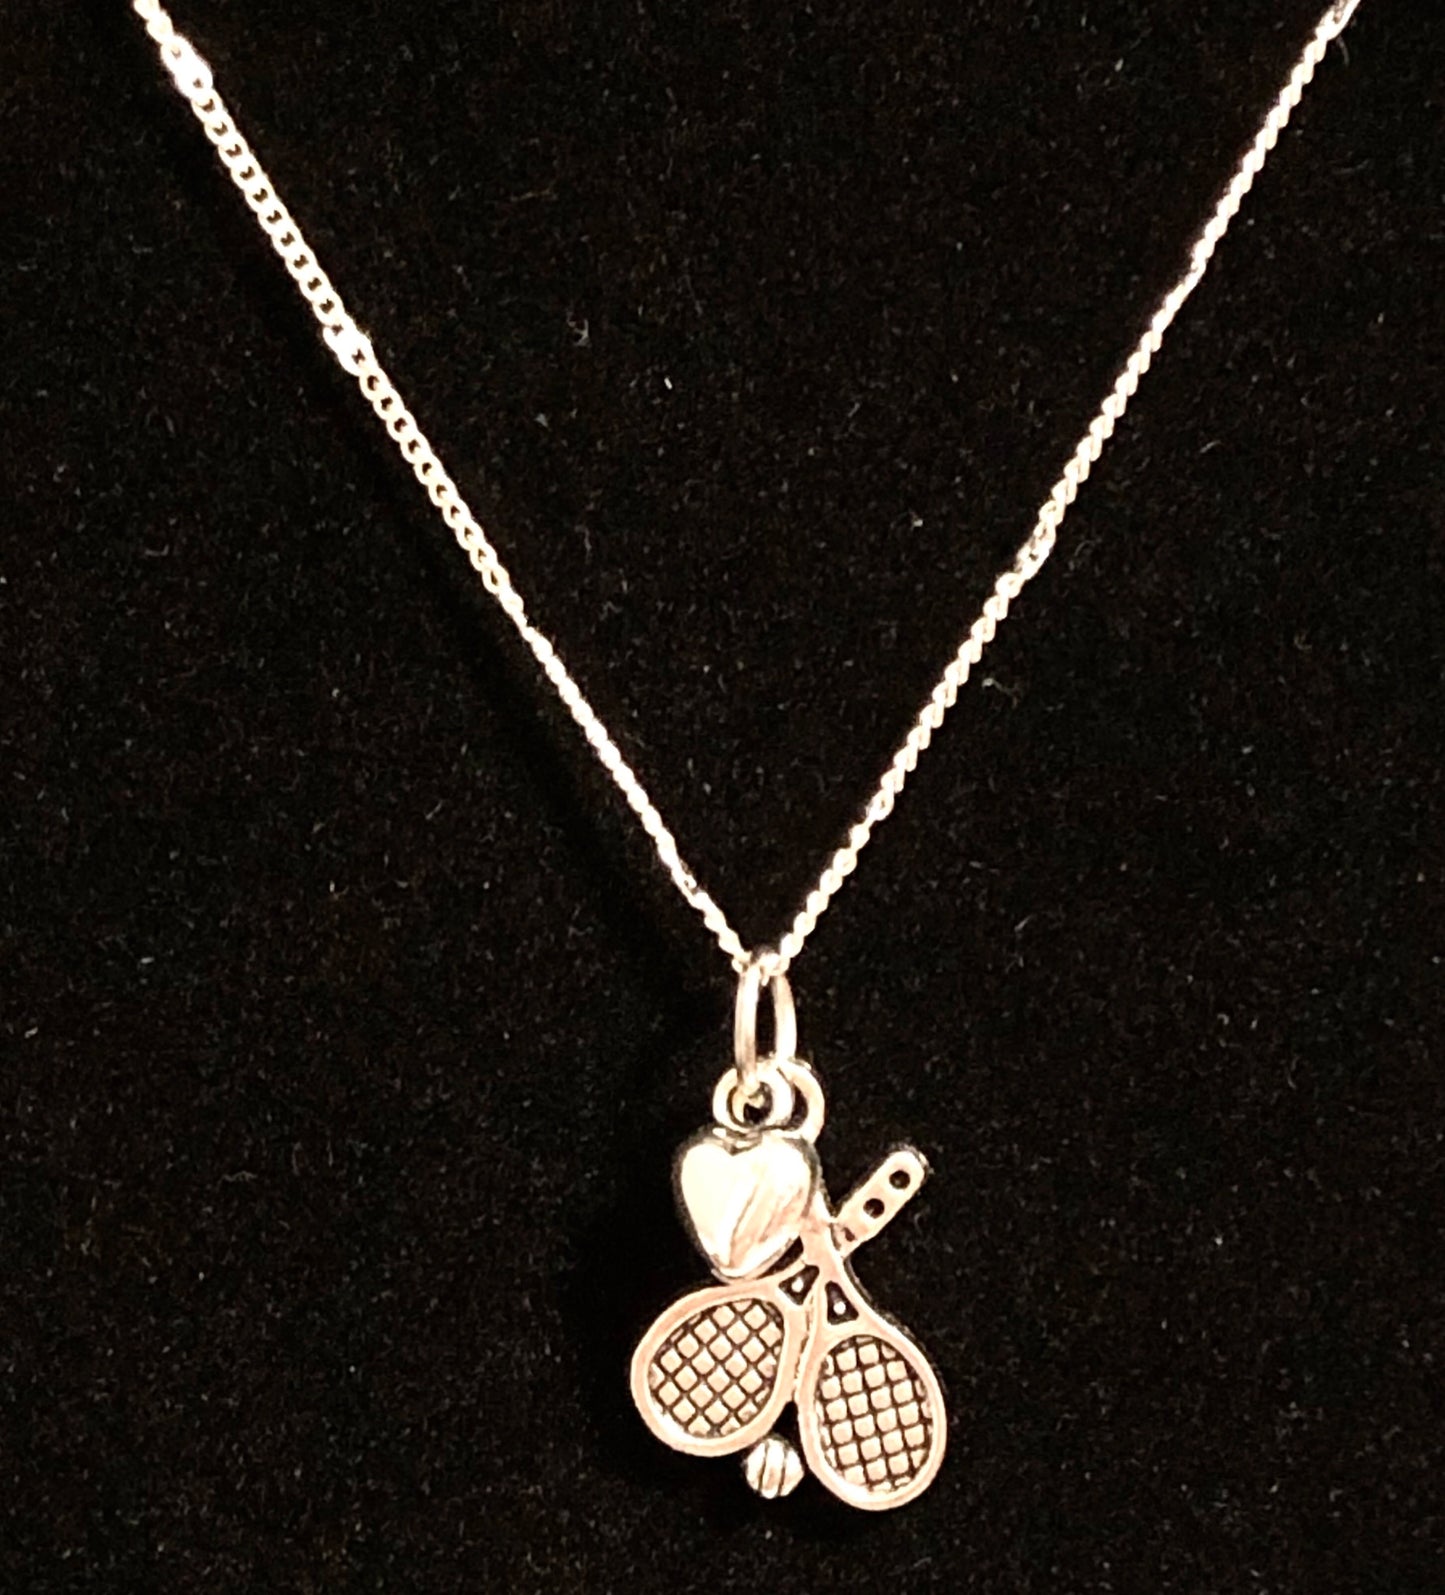 Tennis Charm Necklace - Cheer and Dance On Demand